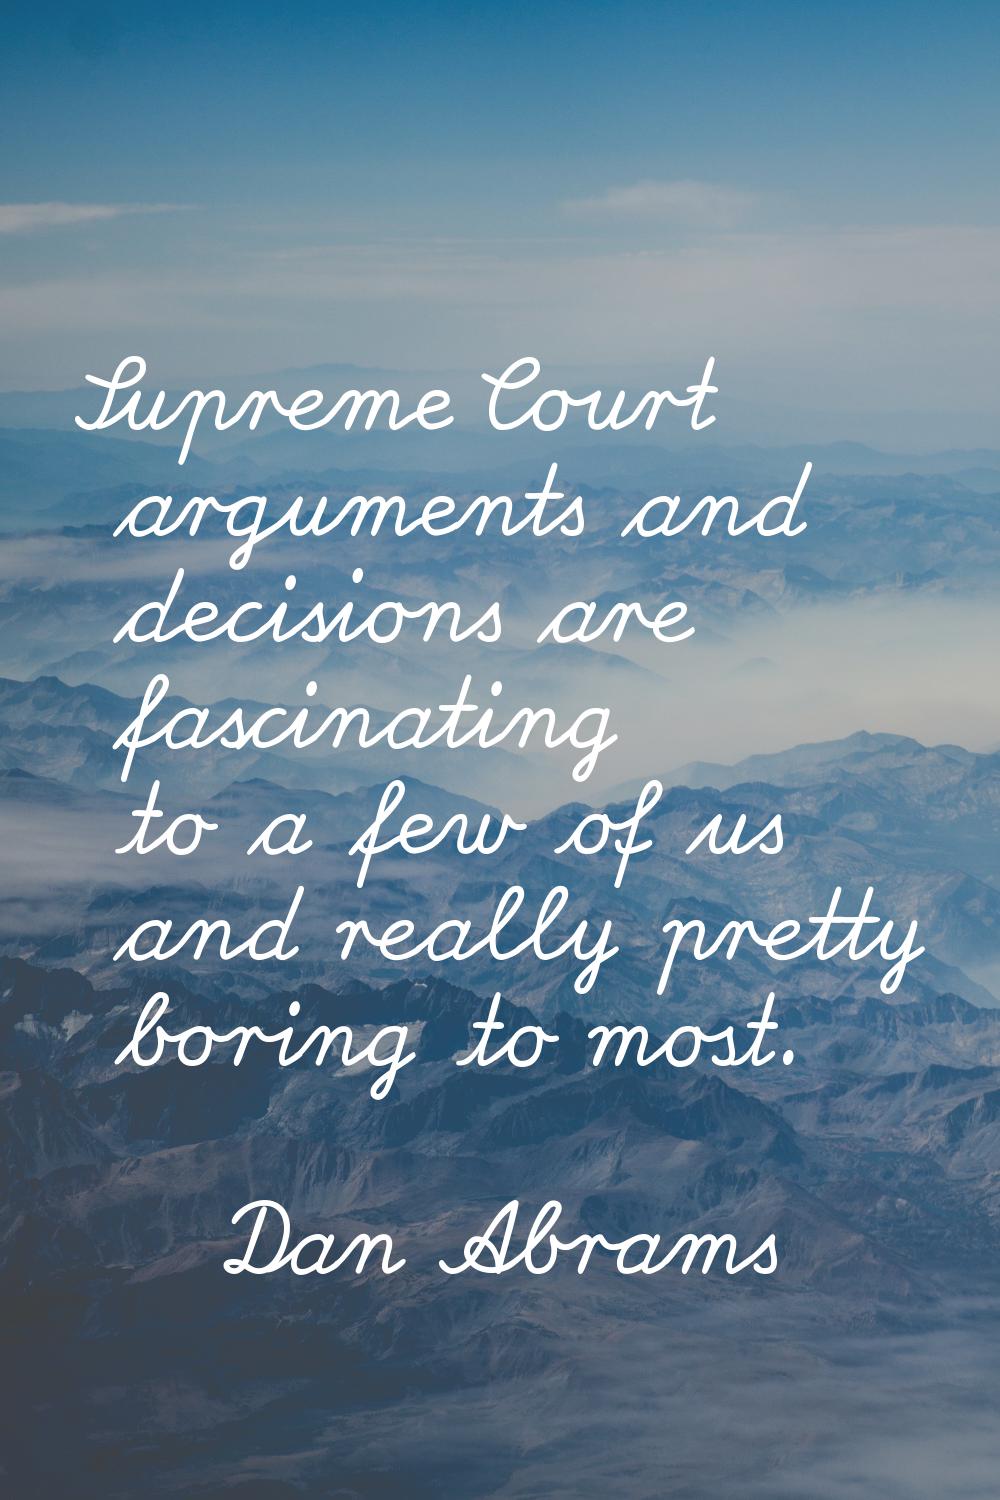 Supreme Court arguments and decisions are fascinating to a few of us and really pretty boring to mo